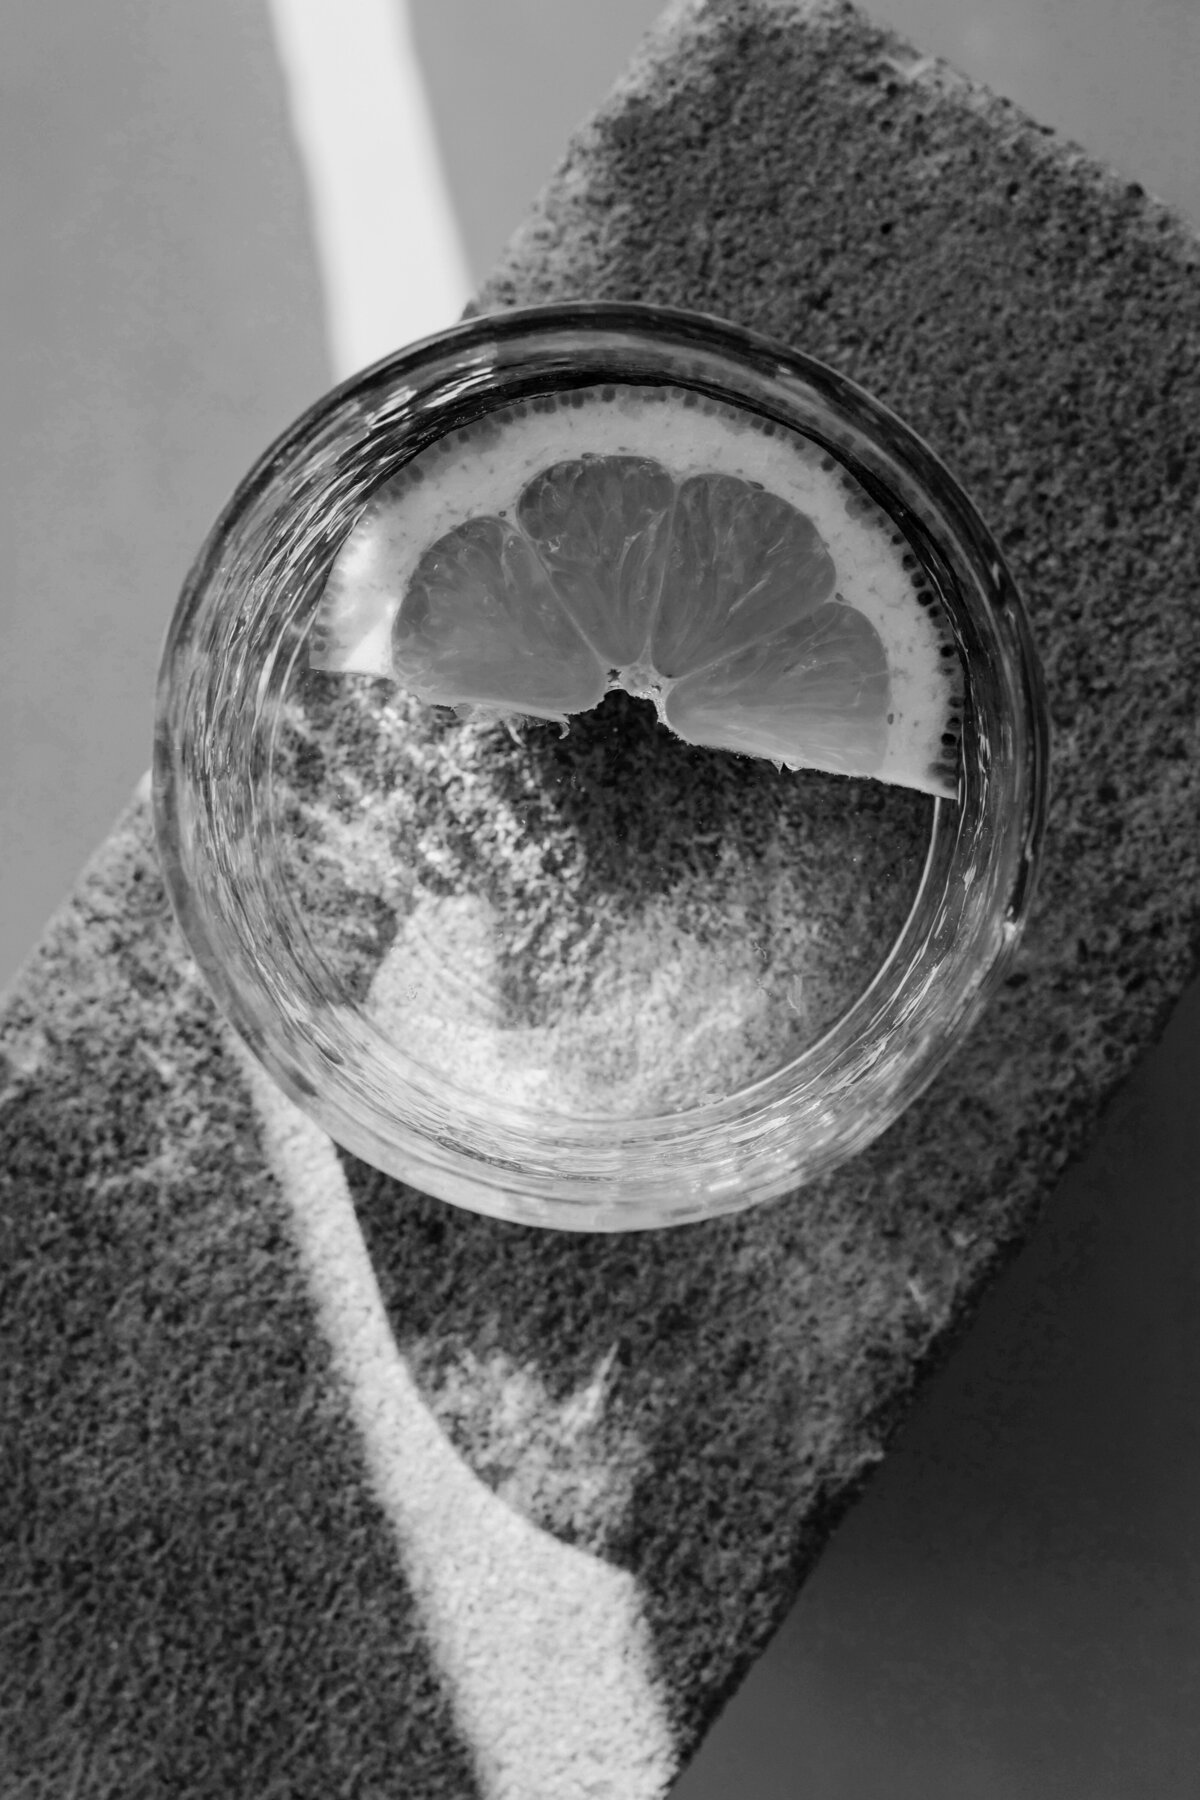 Neutral-kaboompics_Lemon slice in a glass of water